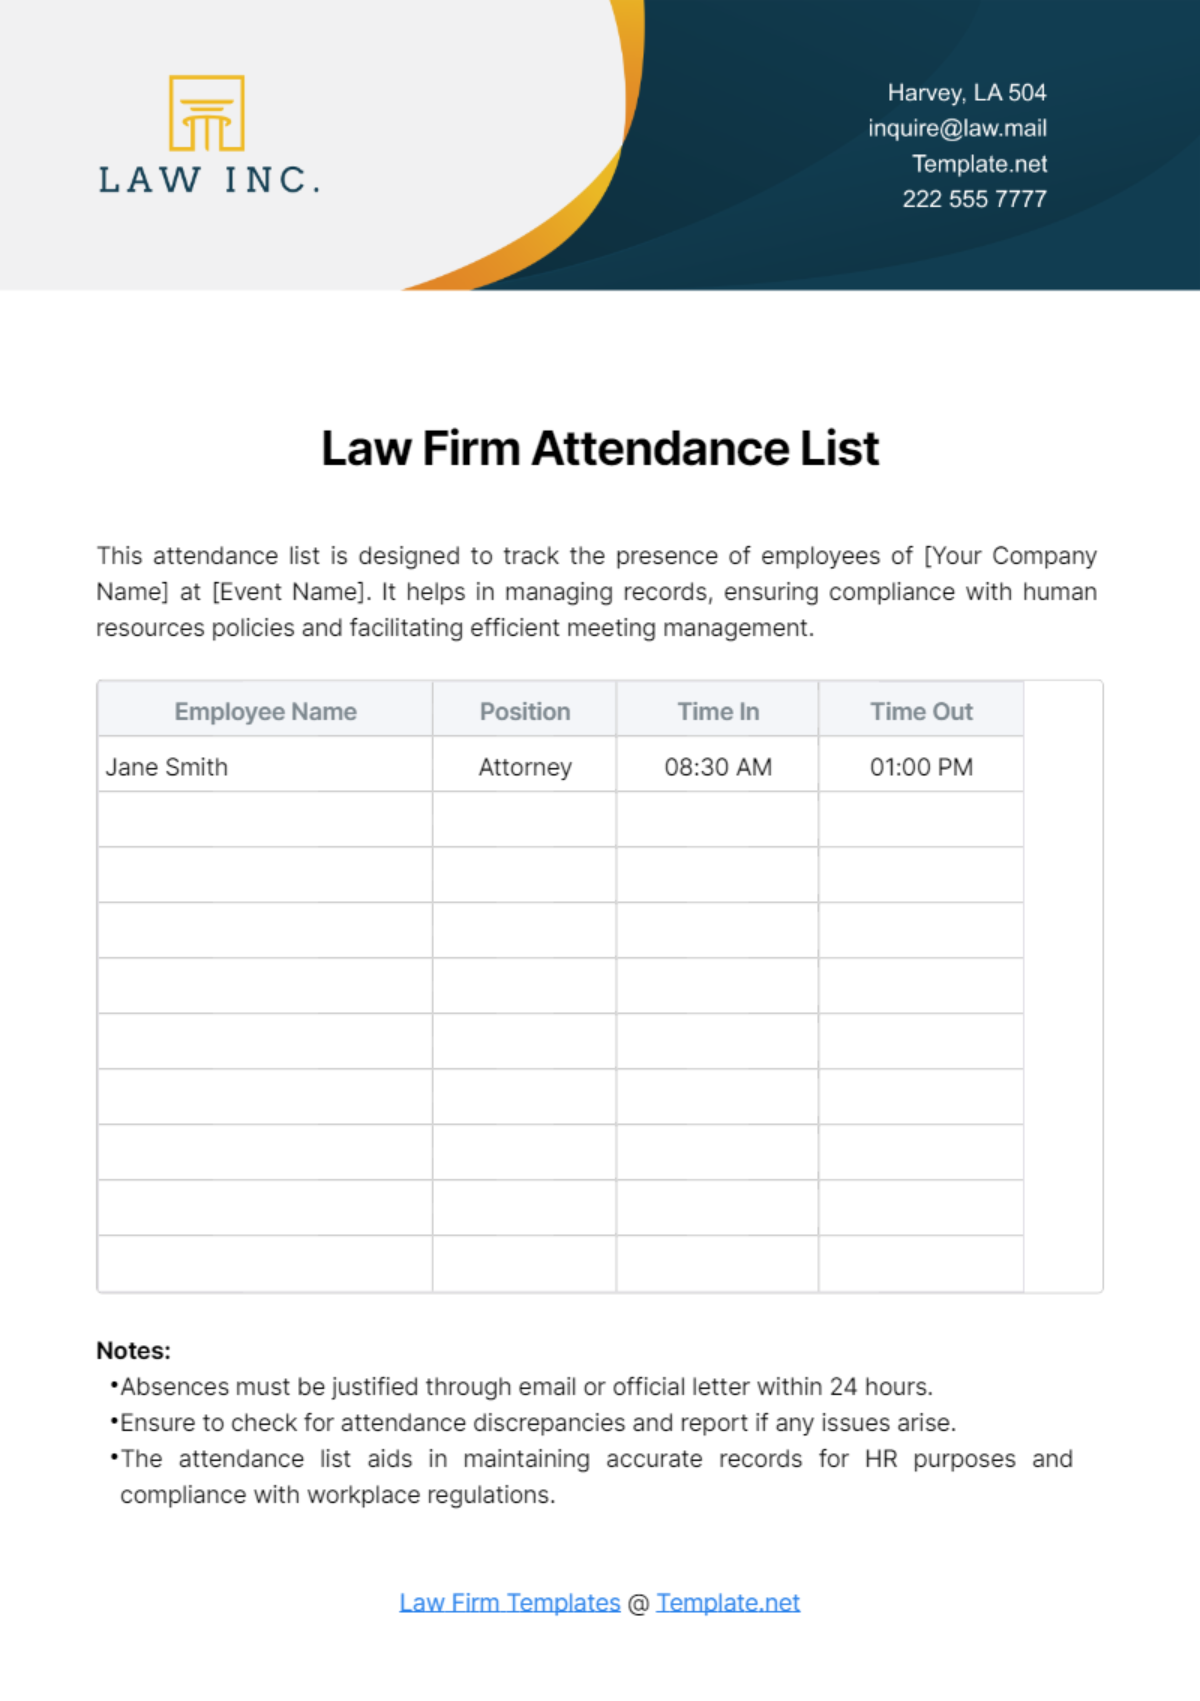 Free Law Firm Attendance List Template